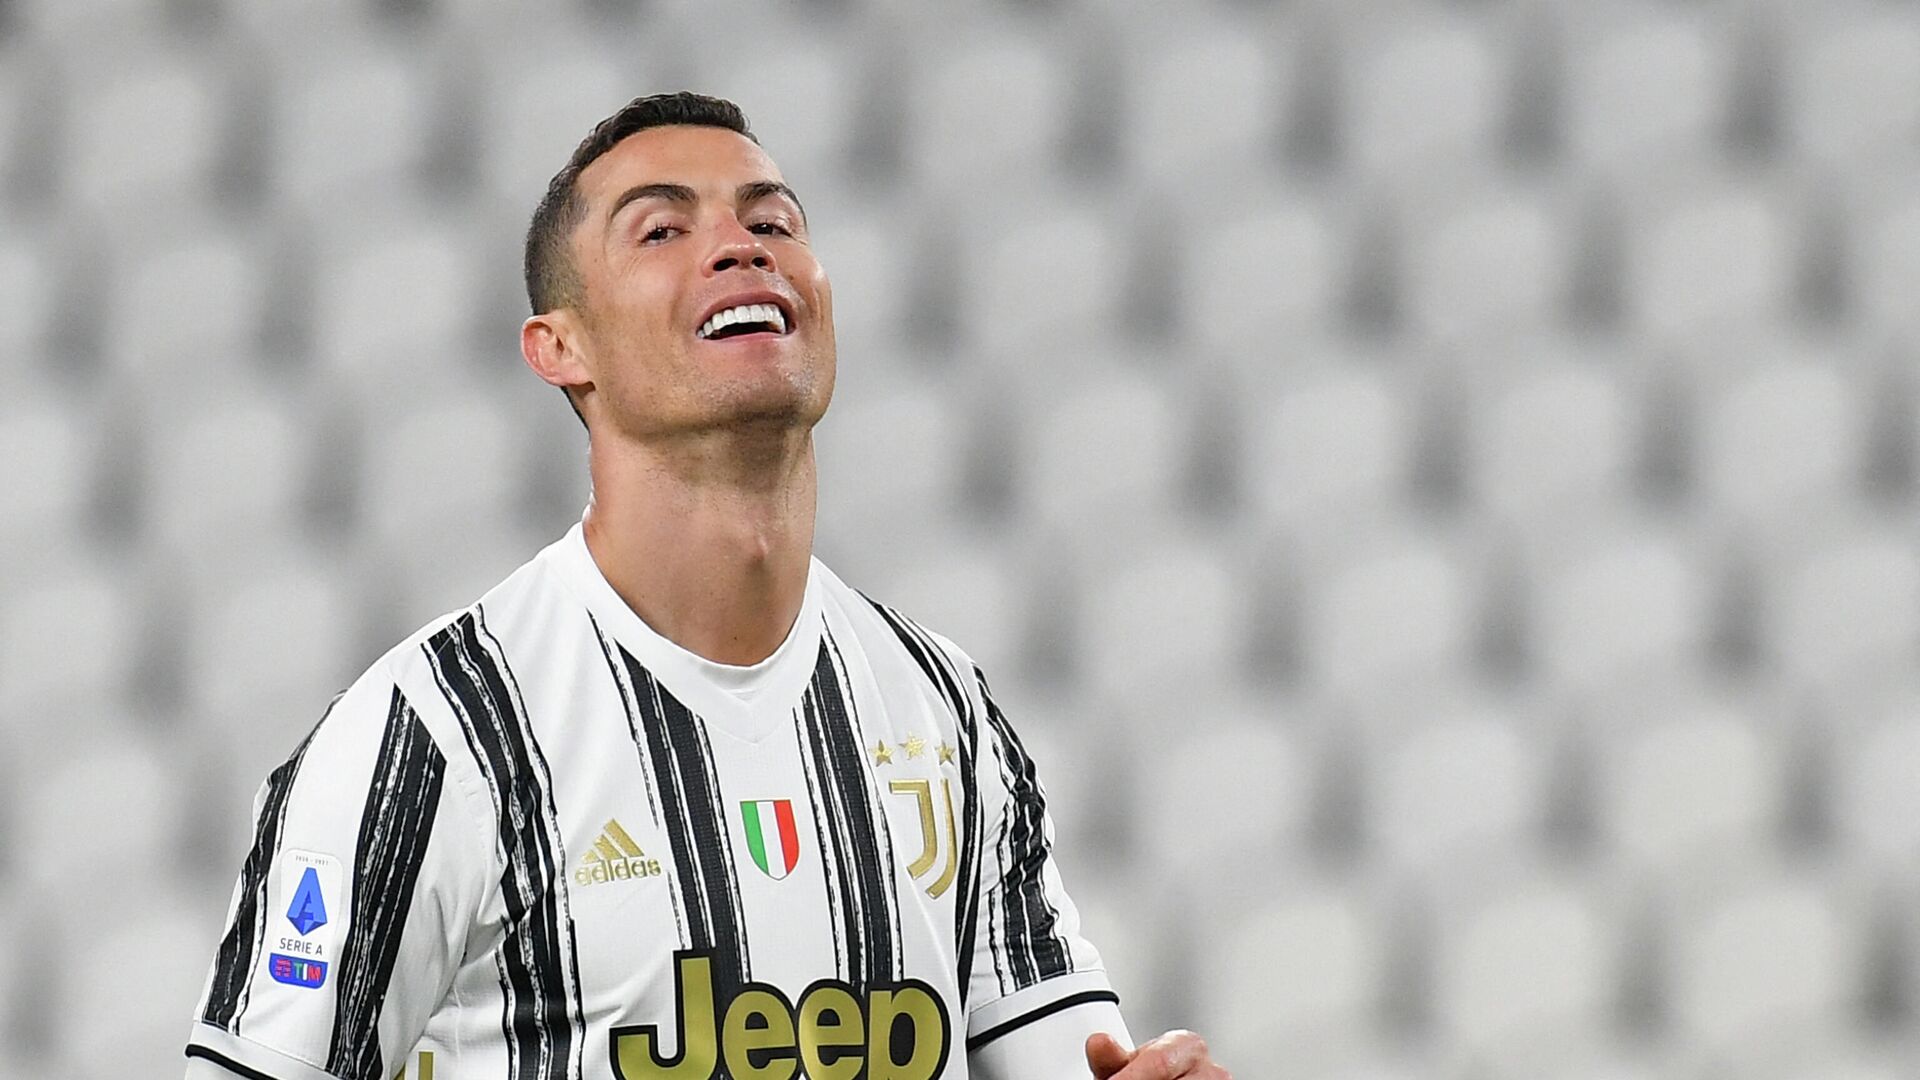 Juventus' Portuguese forward Cristiano Ronaldo reacts during the Italian Serie A football match Juventus vs Spezia on March 02, 2021 at the Juventus stadium in Turin. (Photo by Isabella BONOTTO / AFP) - РИА Новости, 1920, 03.03.2021